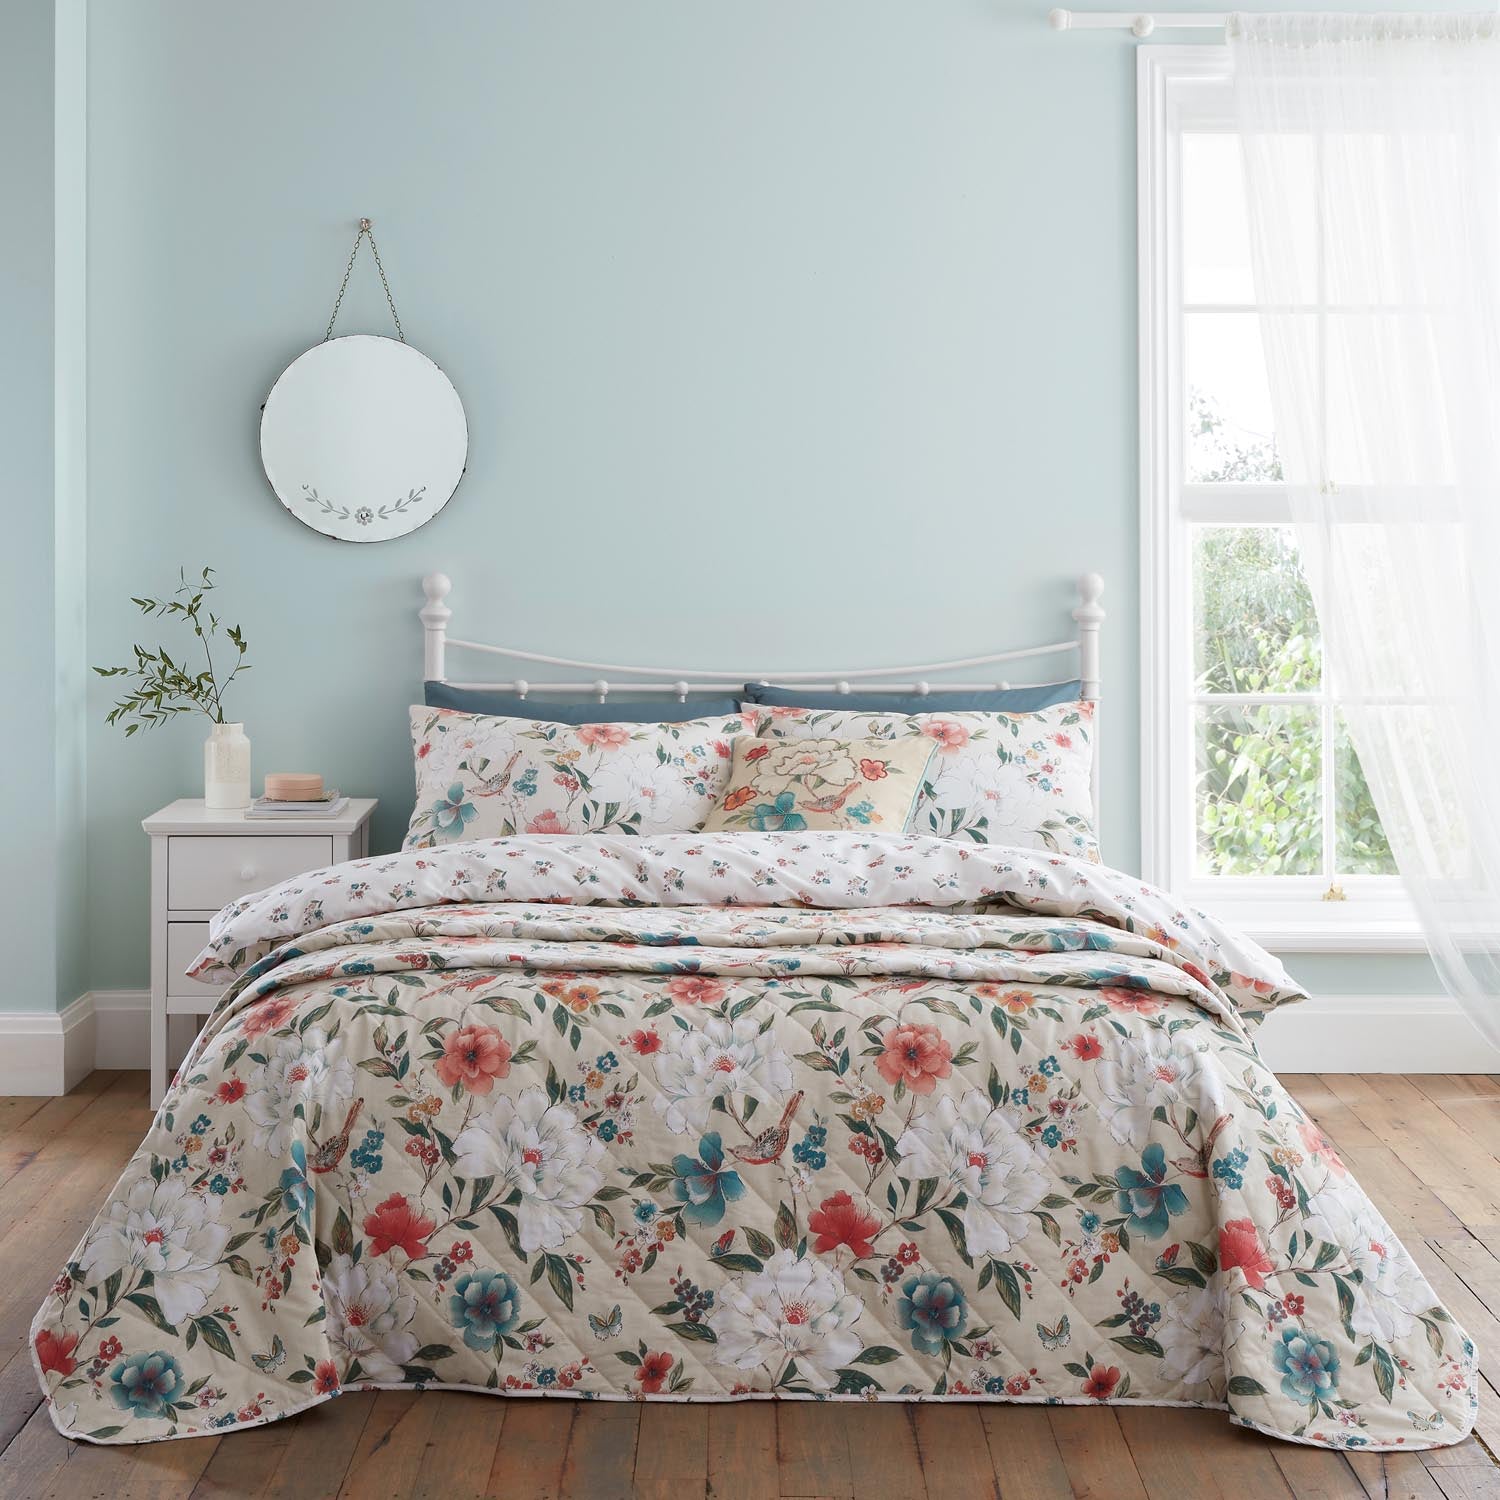 The Home Luxury Collection Eilley Floral Birds Duvet Cover 2 Shaws Department Stores